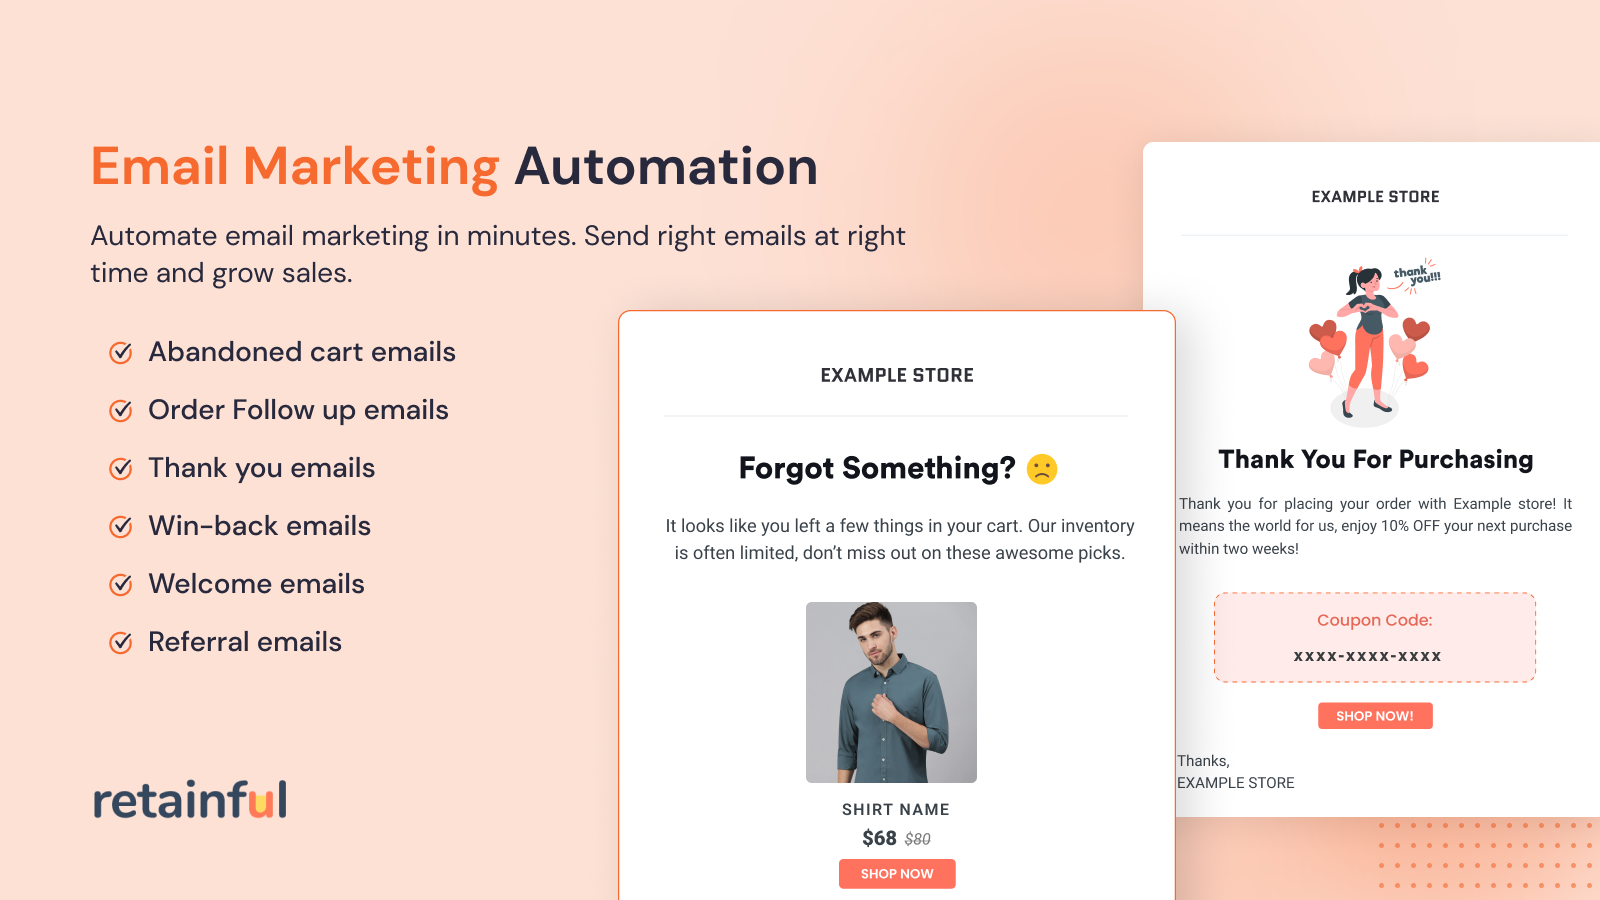 Email Marketing Automation for Shopify stores